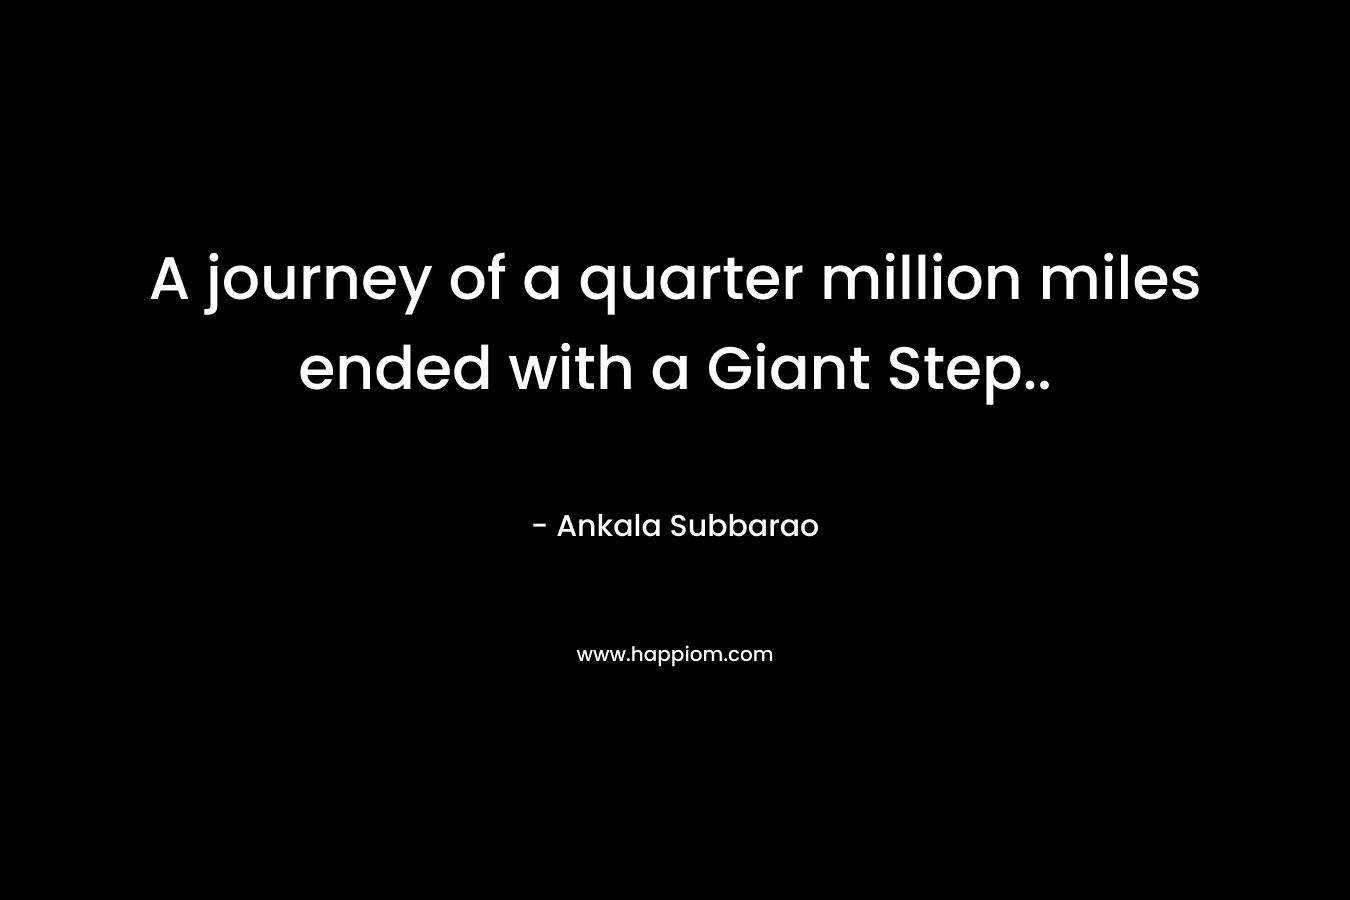 A journey of a quarter million miles ended with a Giant Step..